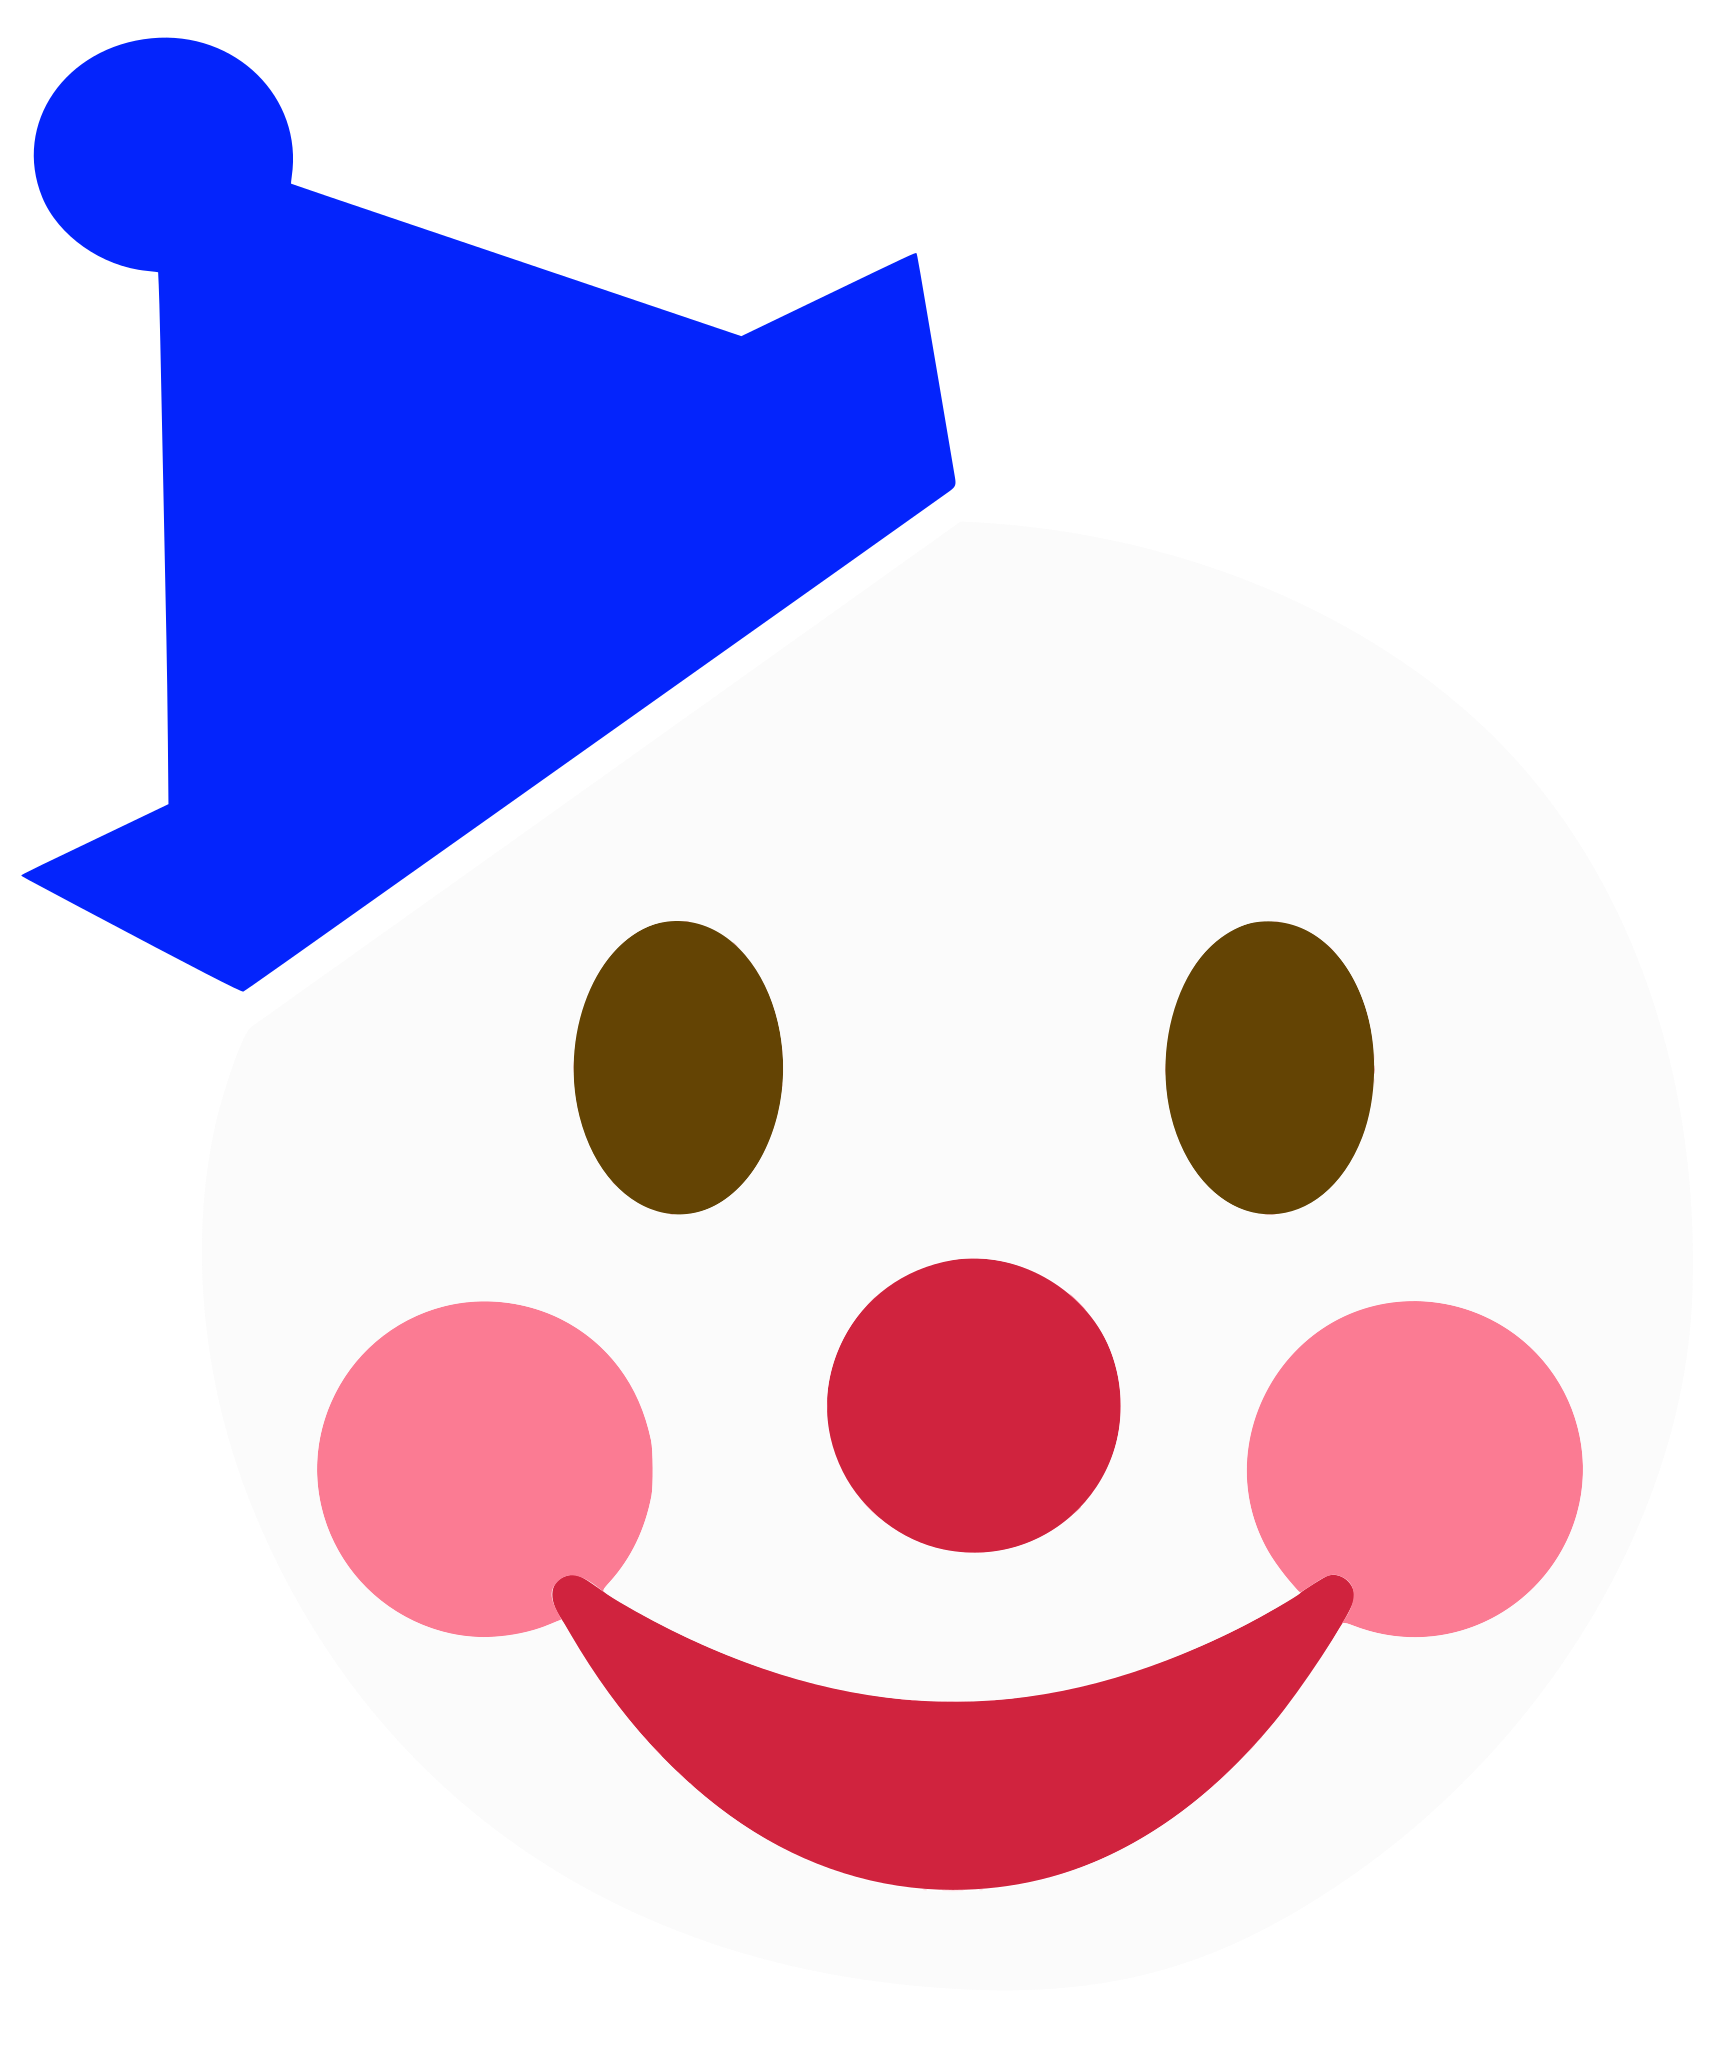 Clown Face PNG Image HD